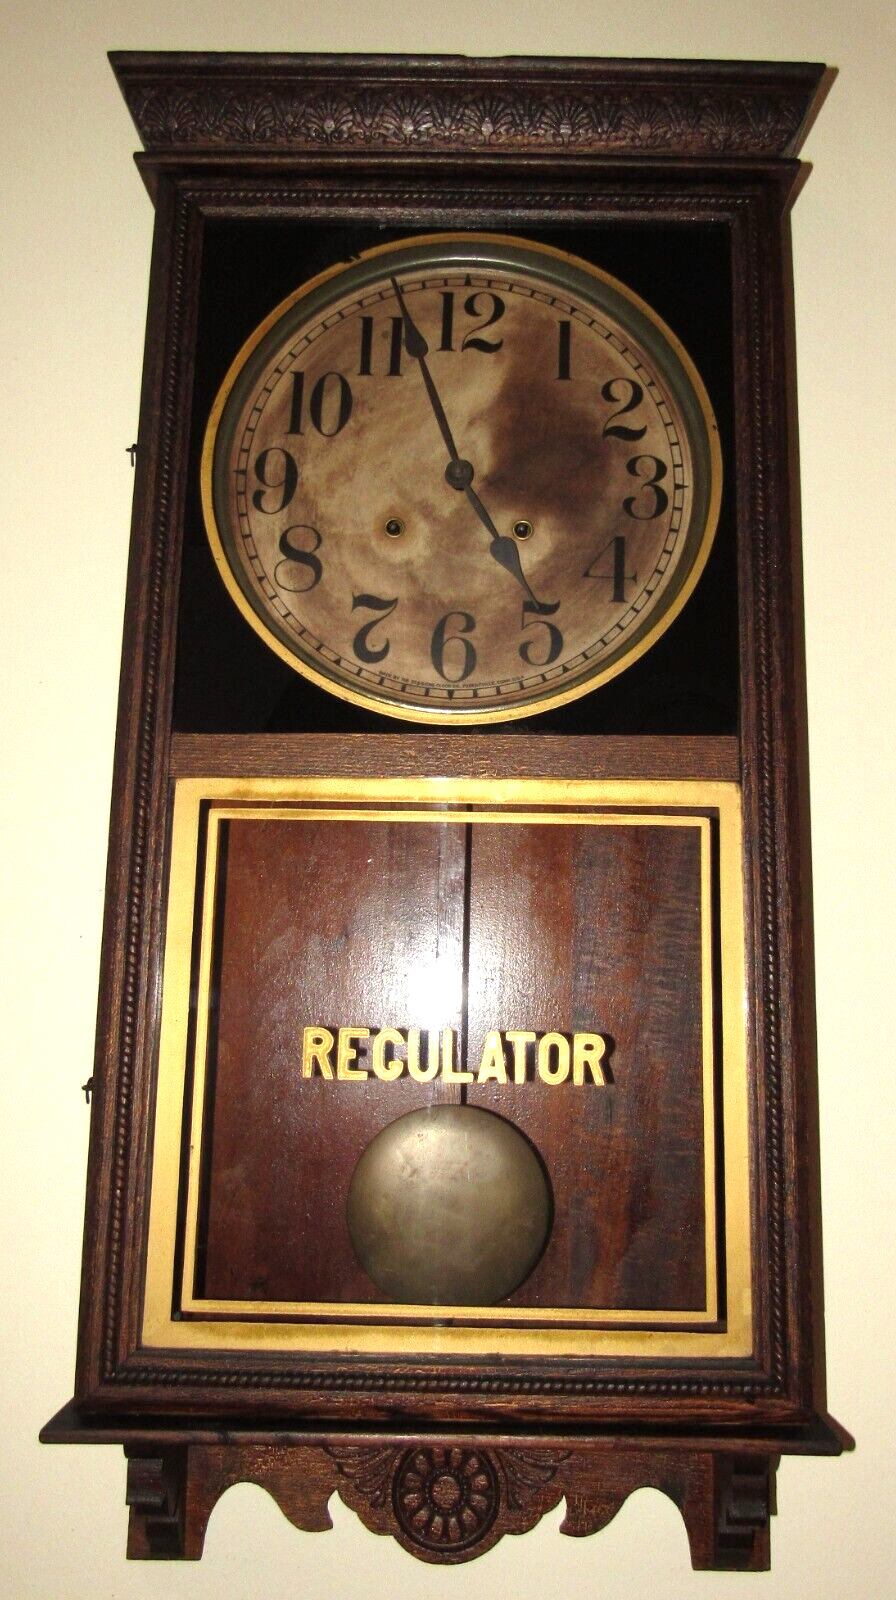 Antique Sessions Store Regulator Wall Clock 8-Day Time/Strike, Key-wind